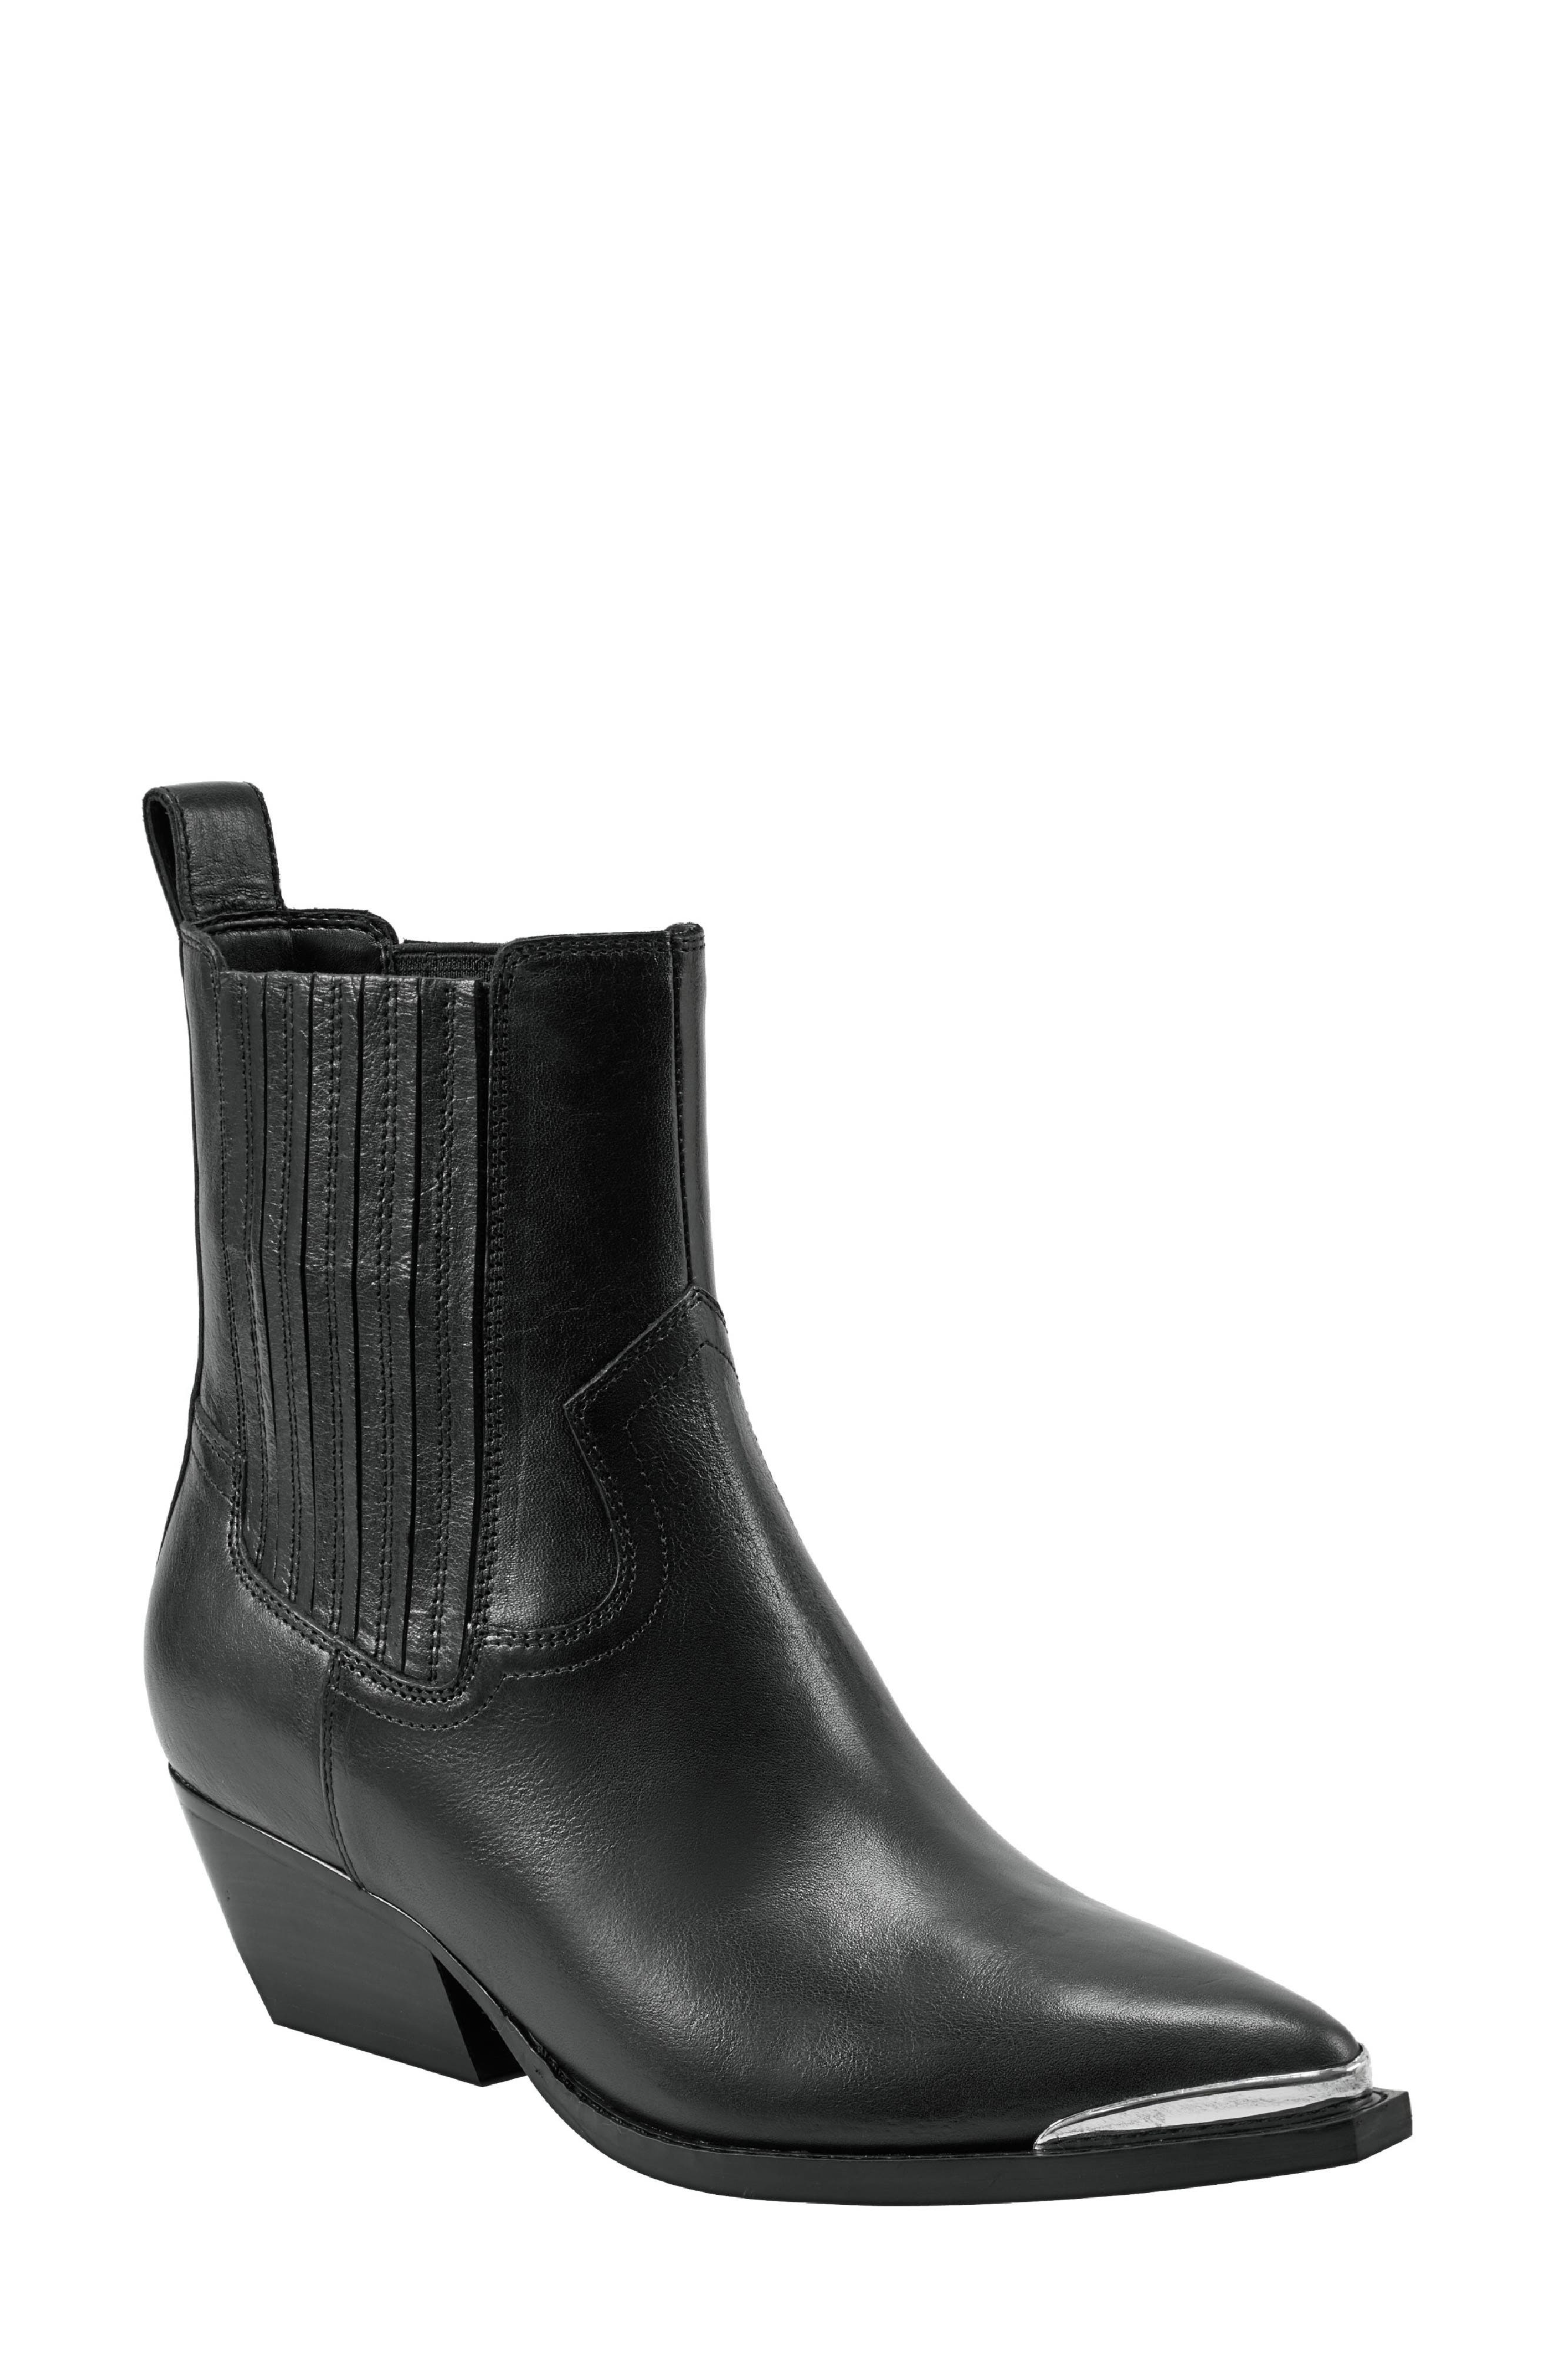 Women's Leather (Genuine) Chelsea Boots | Nordstrom